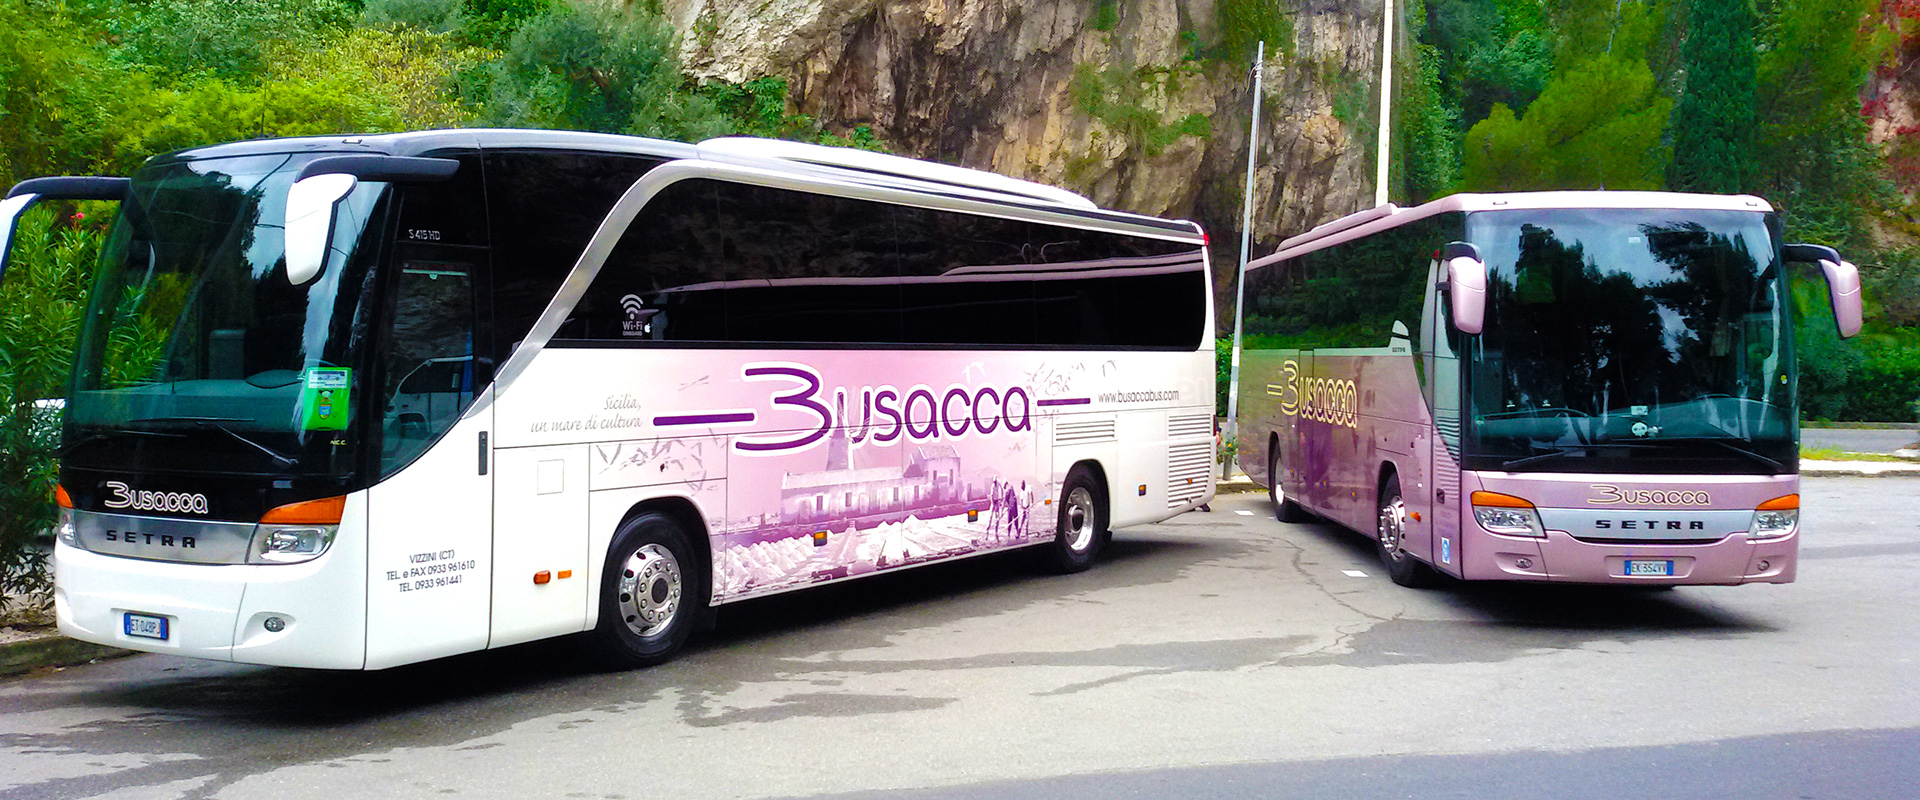 Busacca Bus